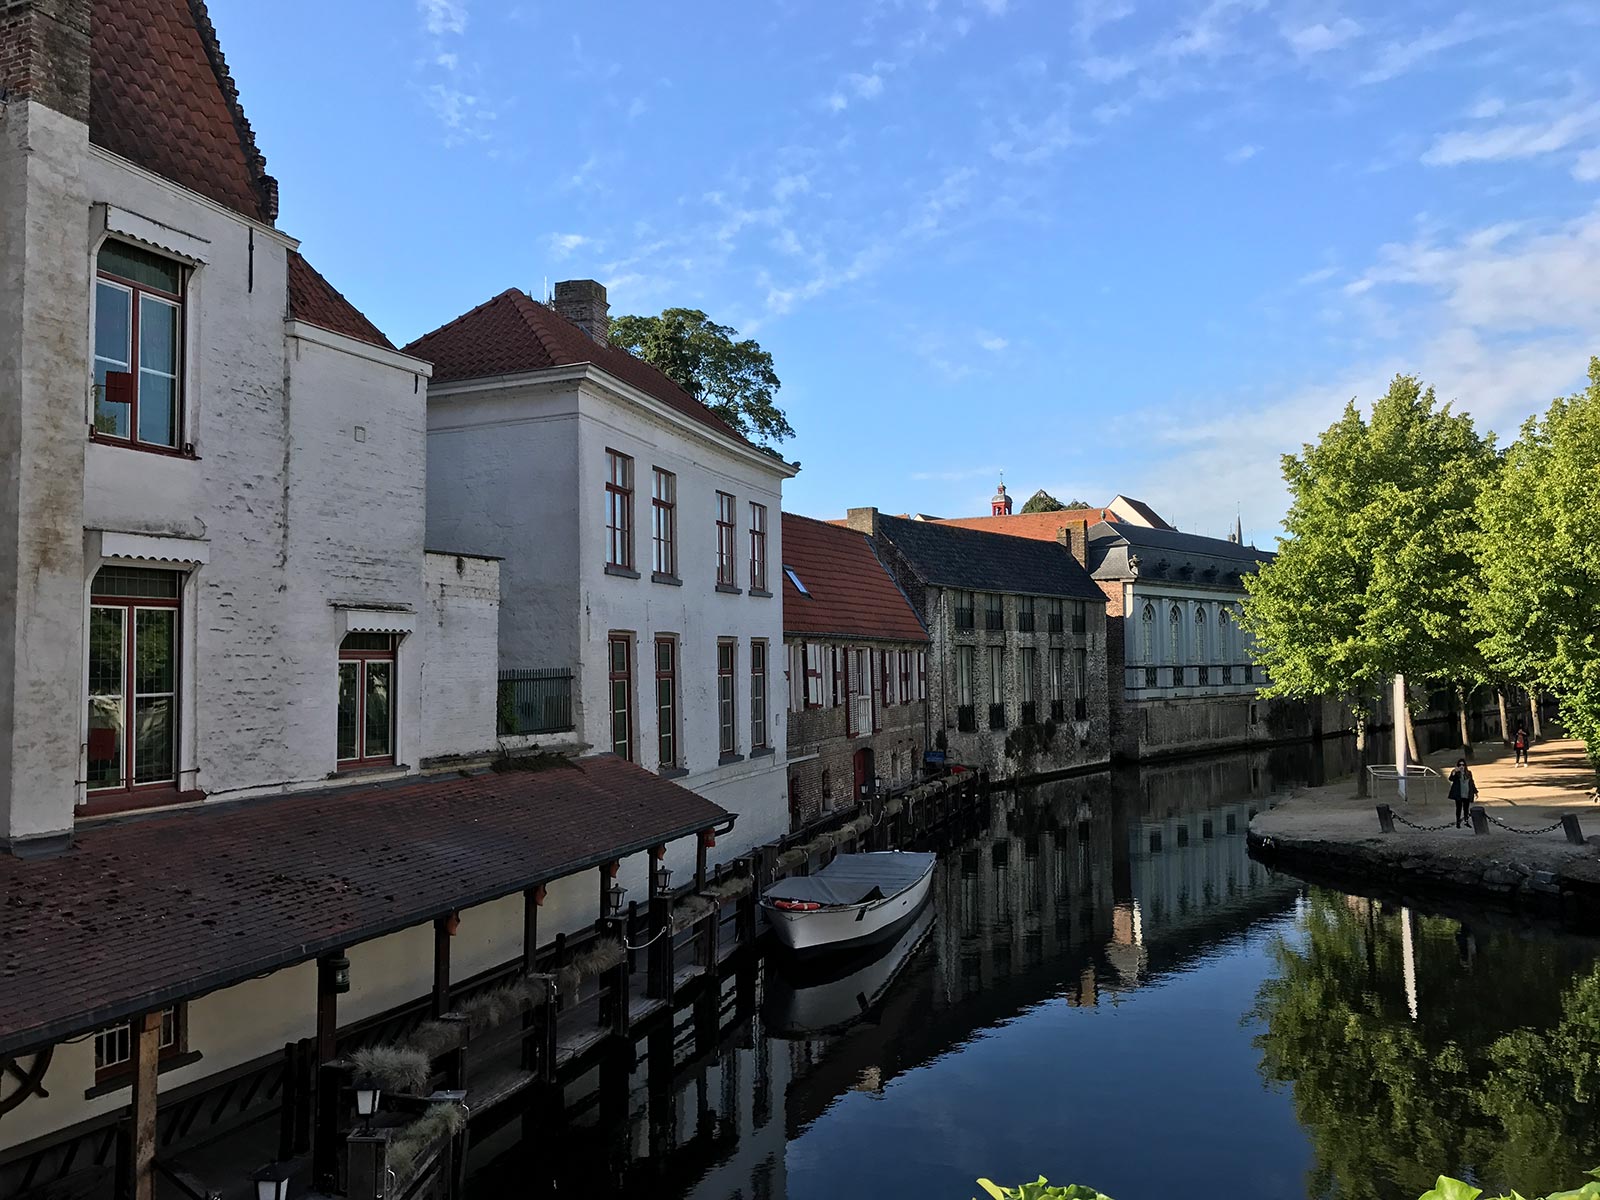 Houses near the river in Bruges, Belgium. The end of 2 years on the road; Slovenia, Luxembourg & Bruges